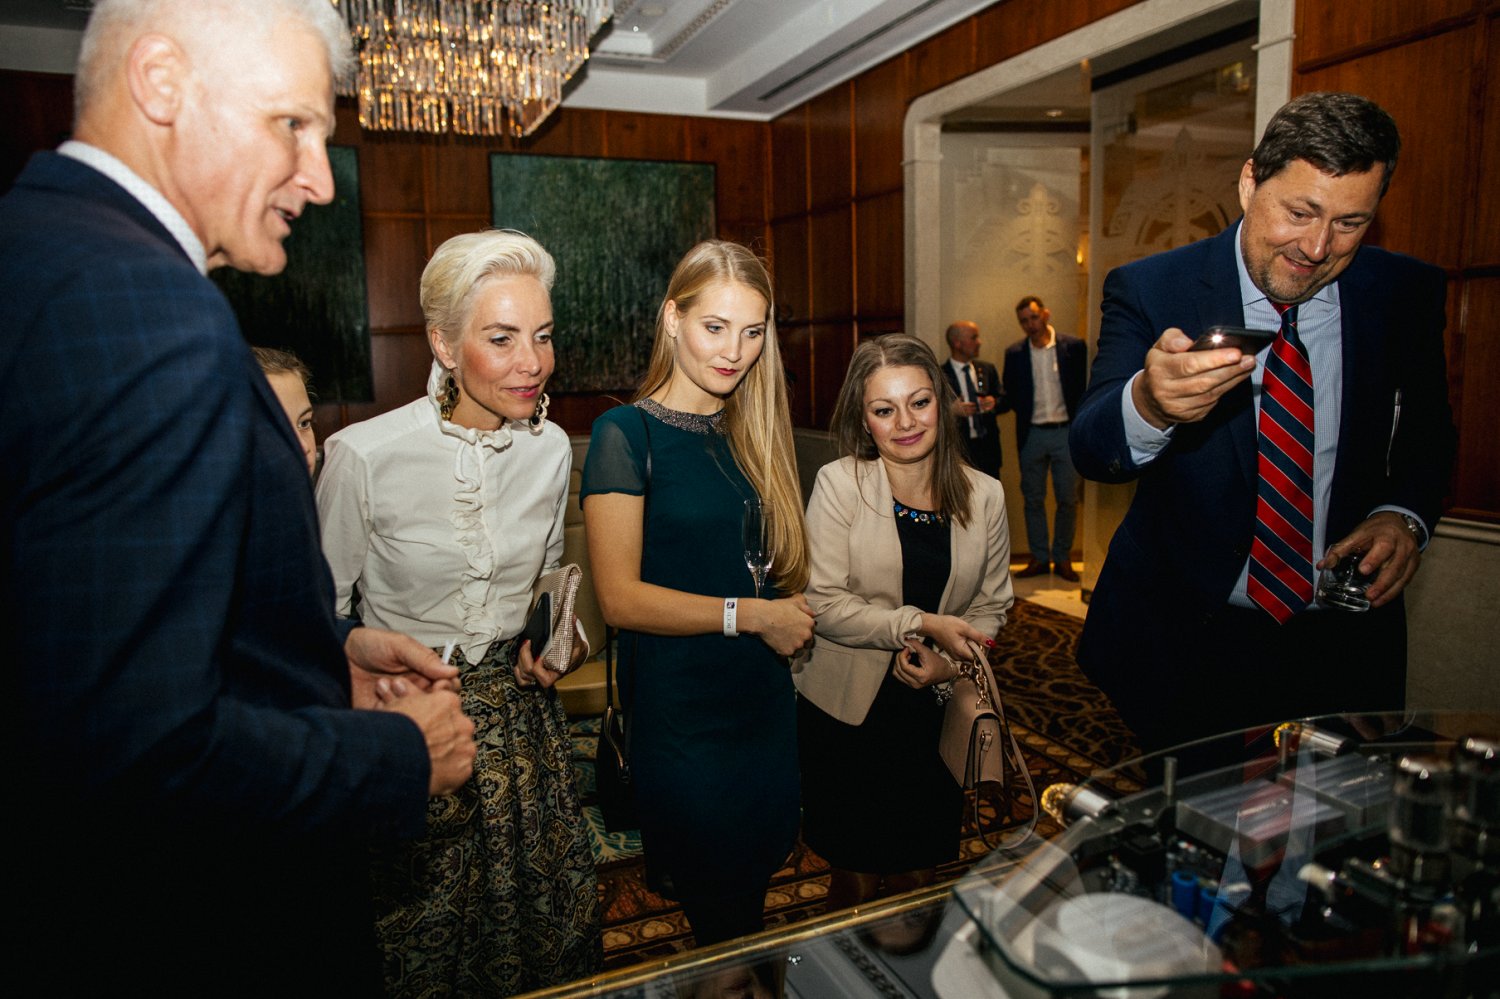 BCCH - Four Seasons Hotel, Budapest - 24 / 10 / 2021